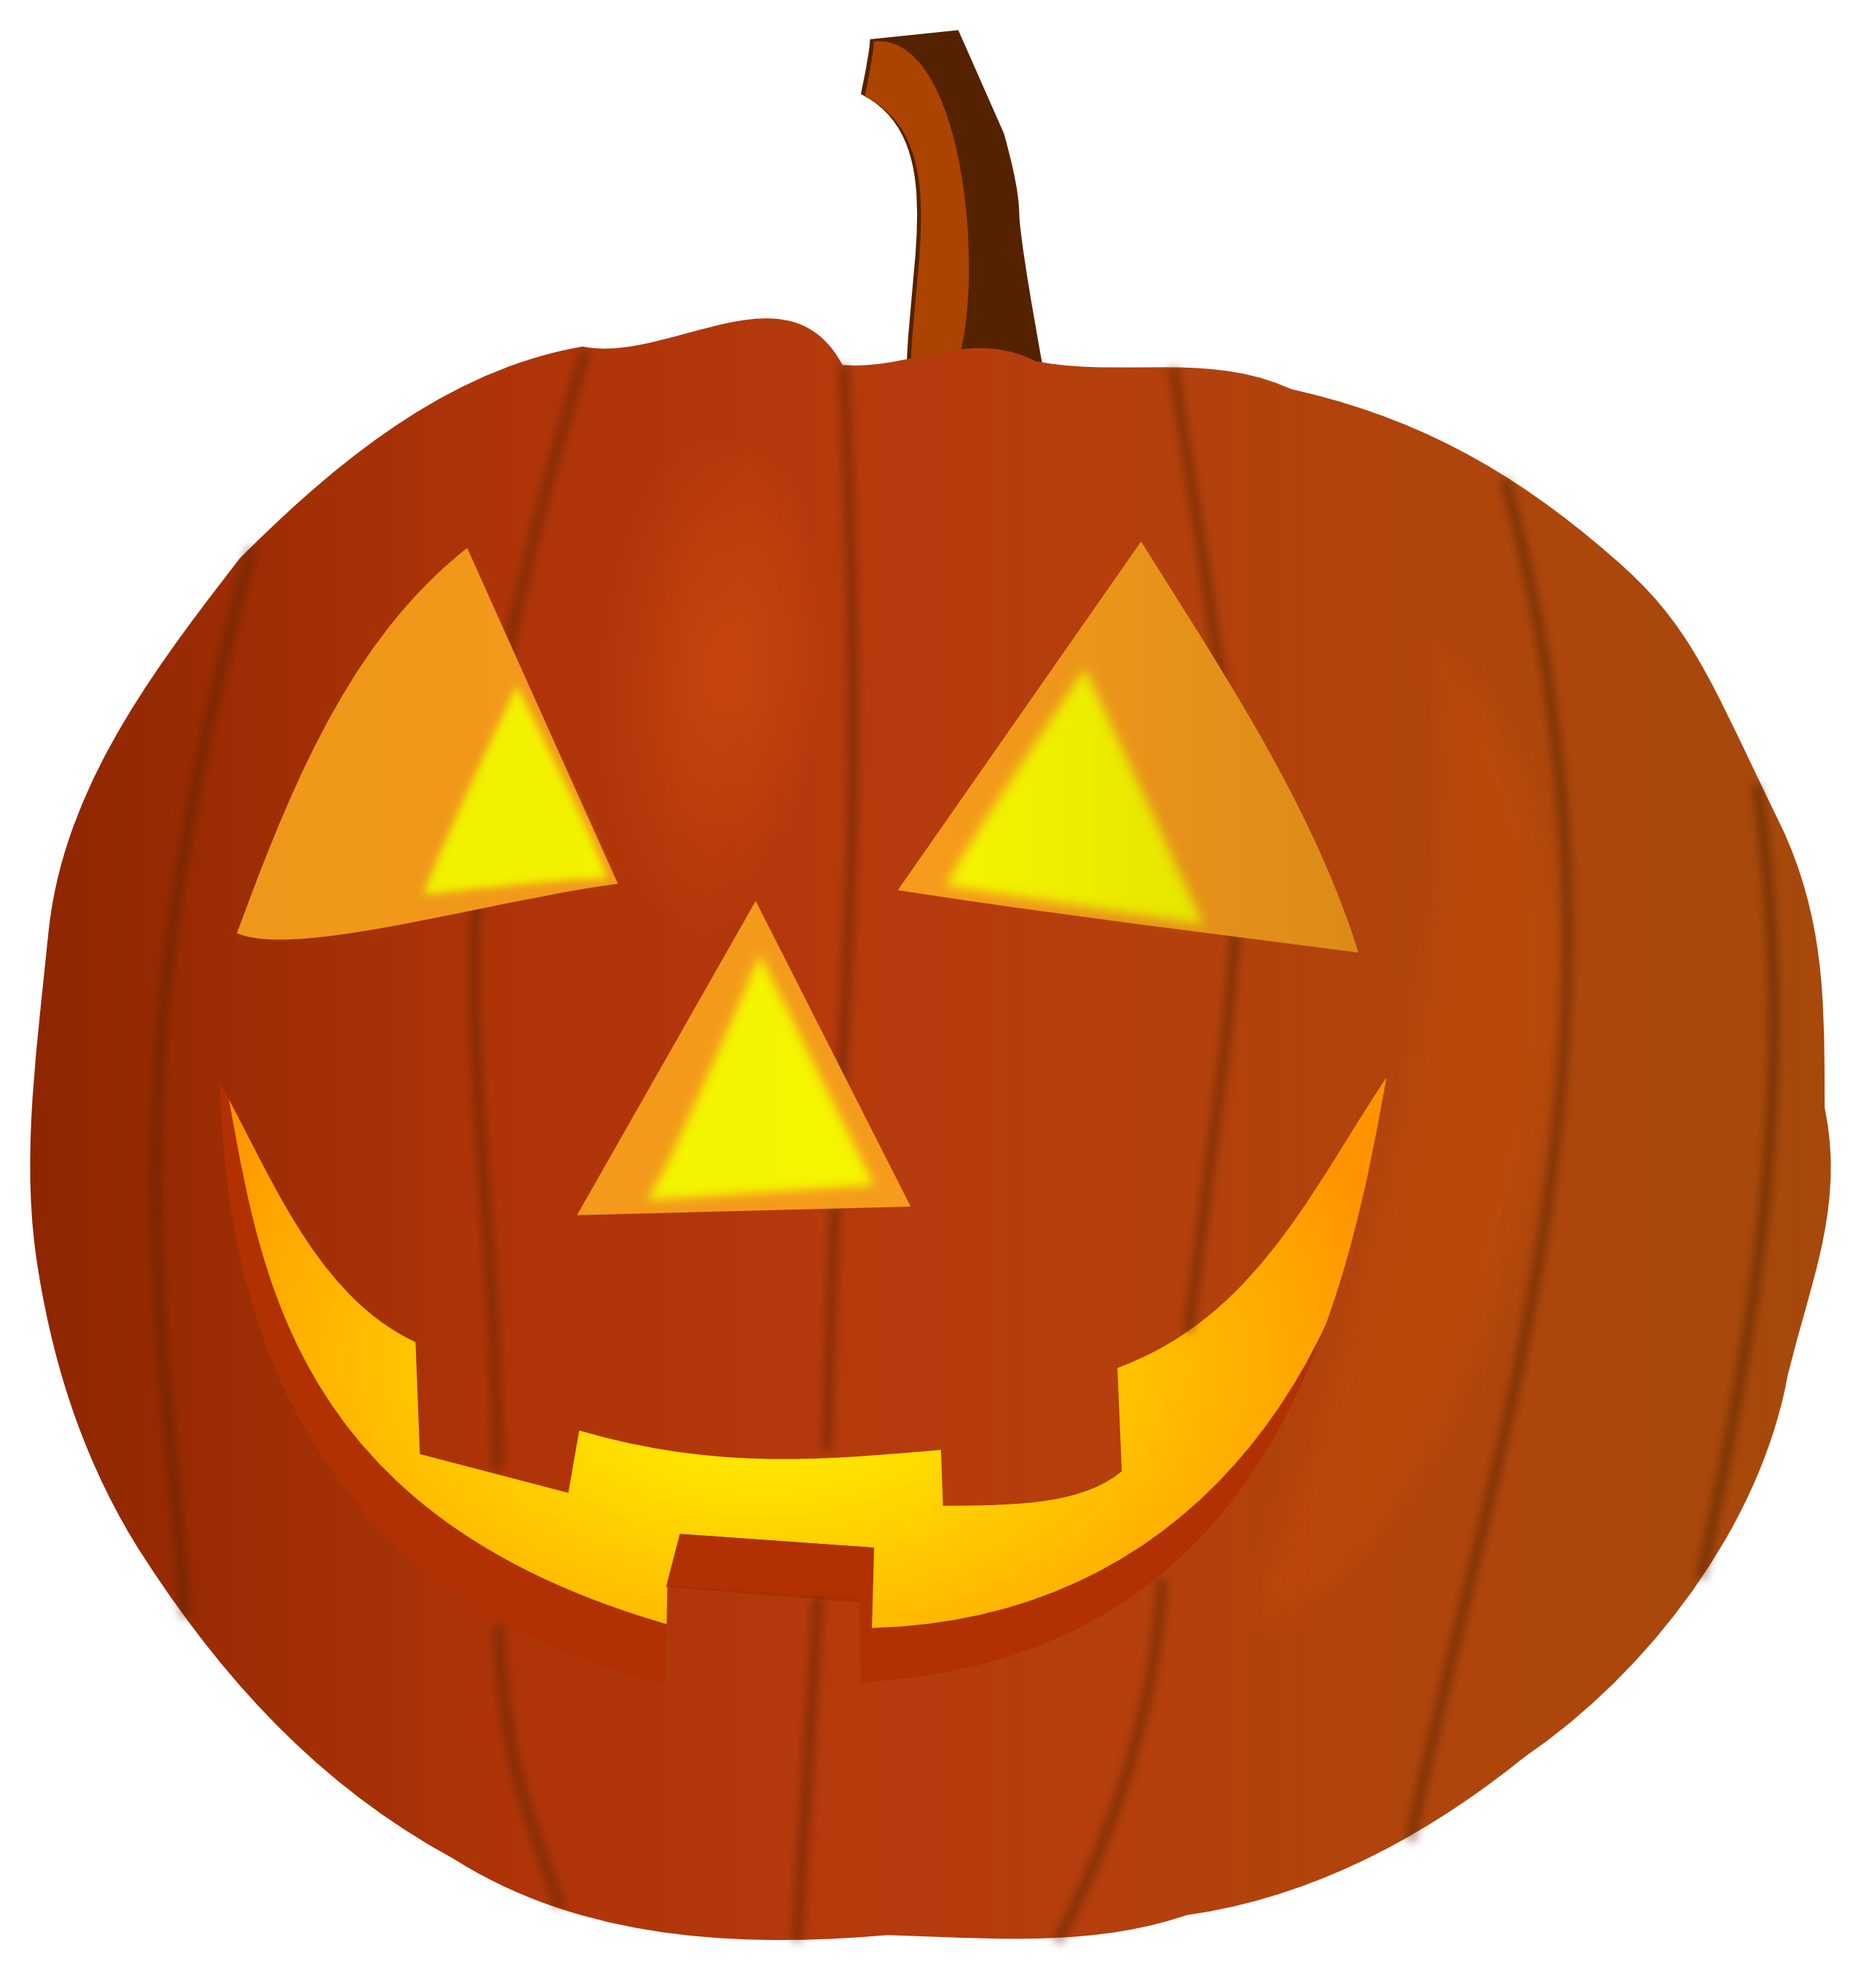 20 Halloween Pumpkin Clip Art Free Cliparts That You Can Download To